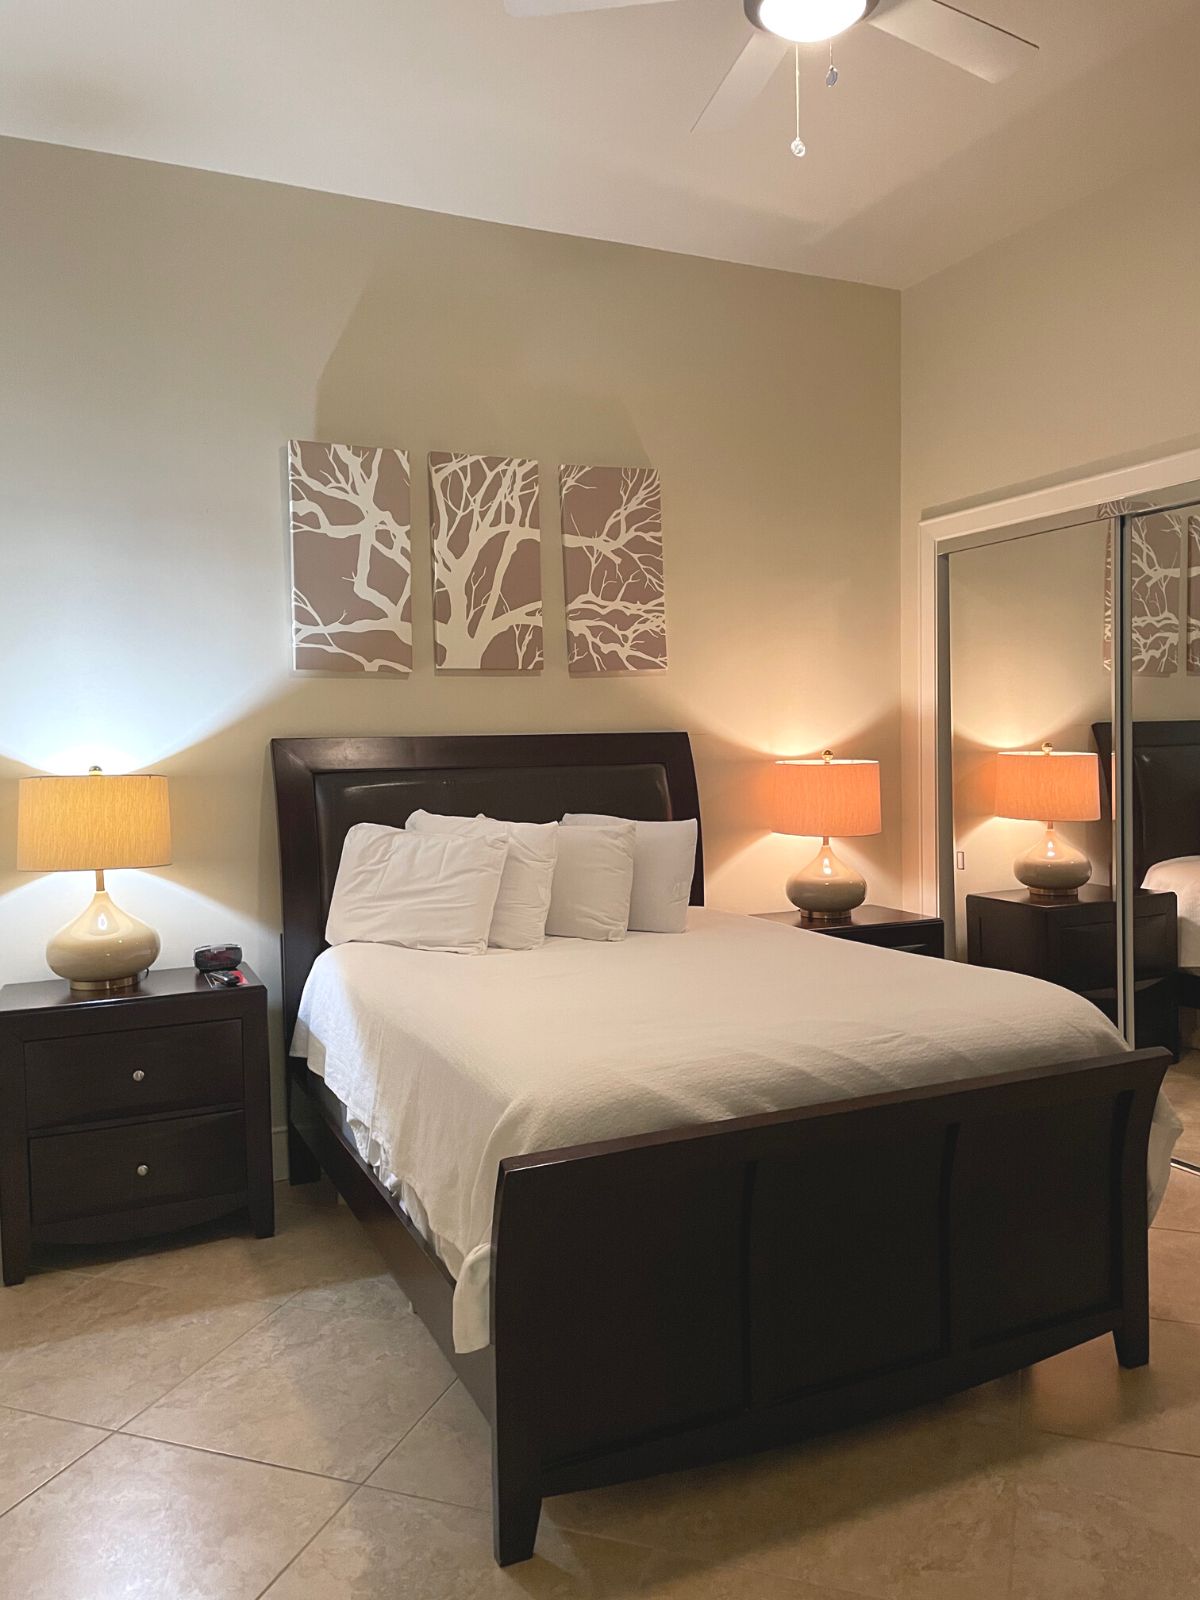 Bed in one of the bedrooms of a 3 bedroom suite at Turquoise Place Orange Beach.